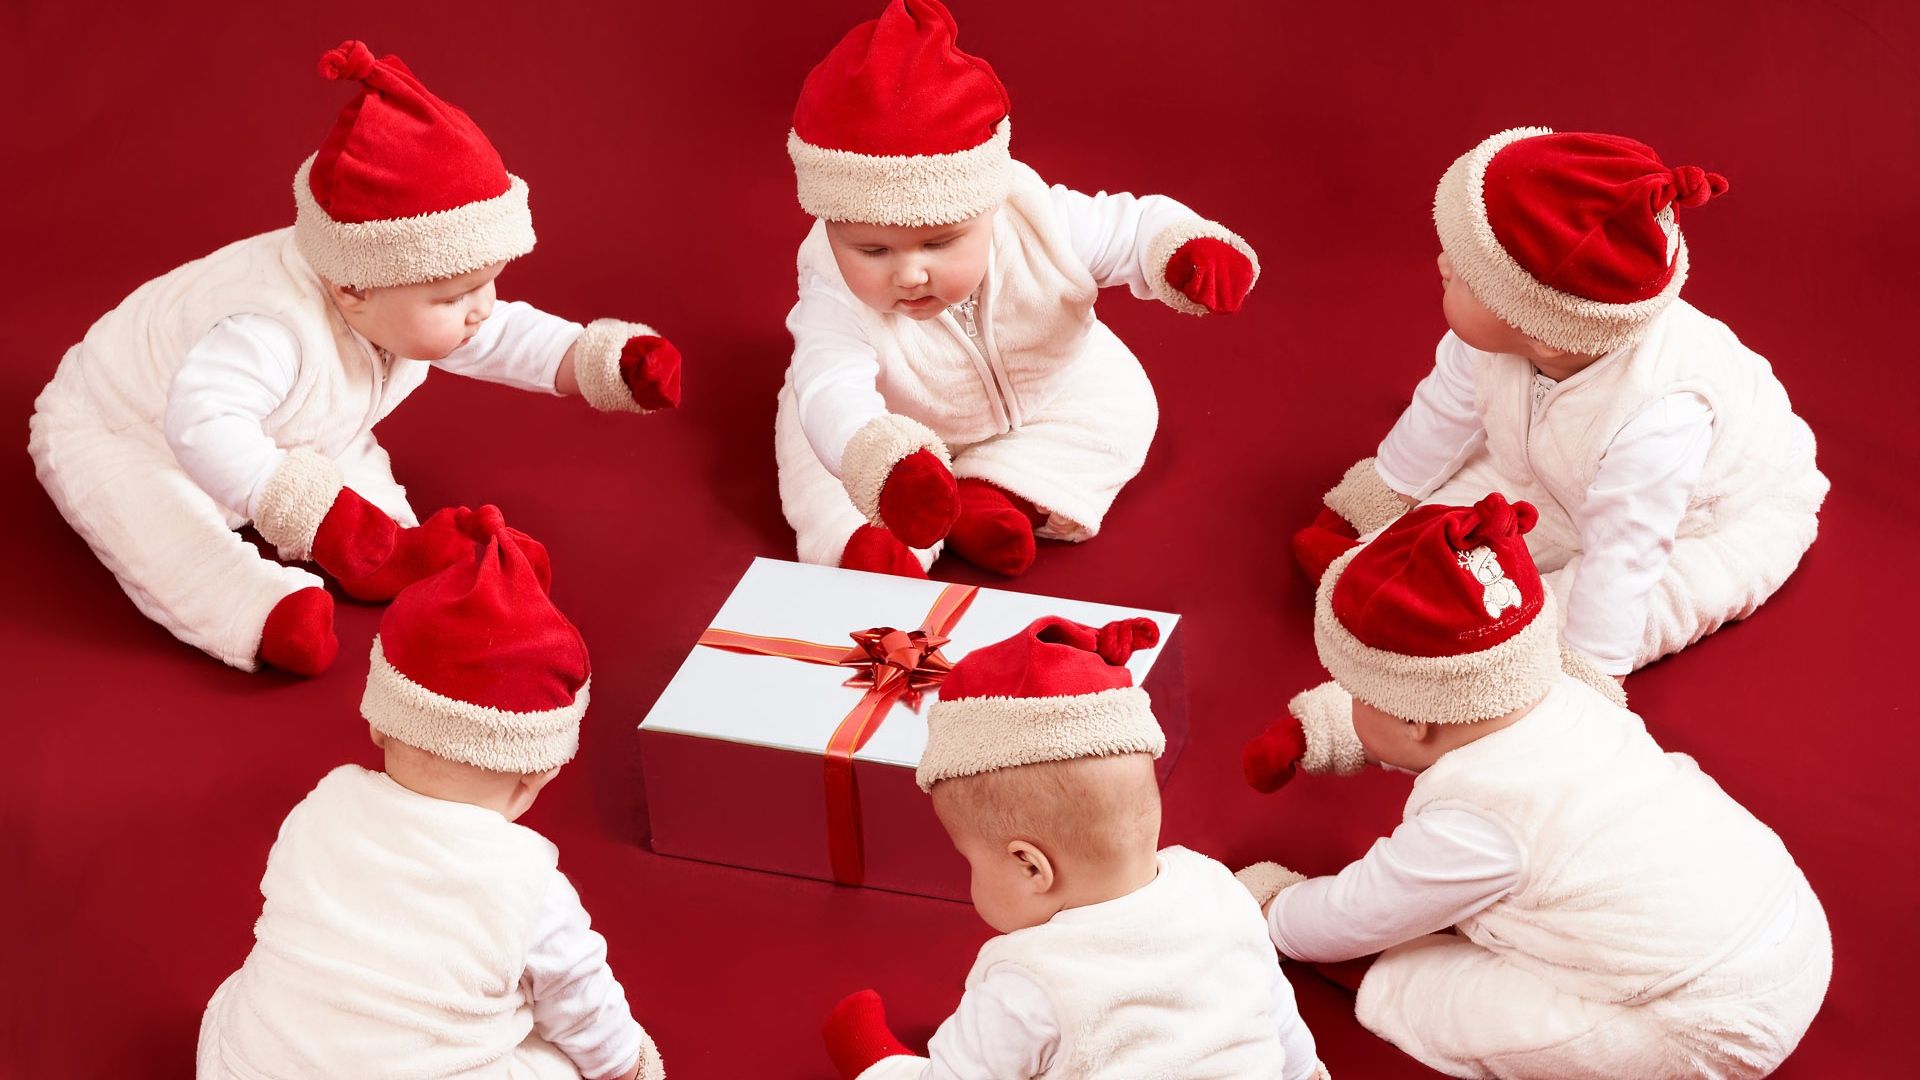 Download Wallpaper 1920x1080 children, holiday, new year, gifts Full HD 1080p HD Background